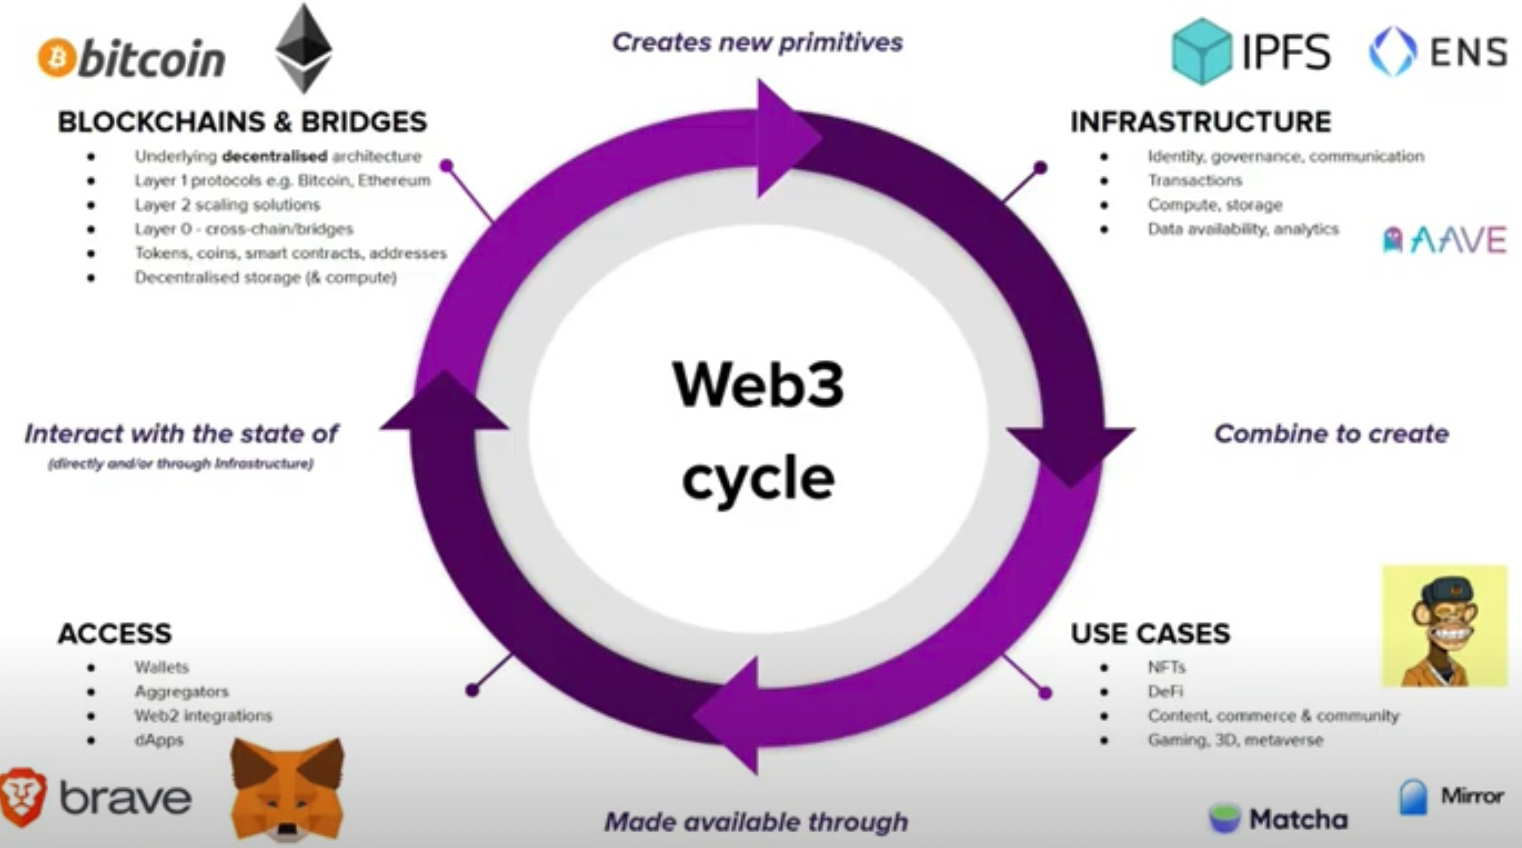 The web3 cycle - a diagram showing the four "layers" of web3.